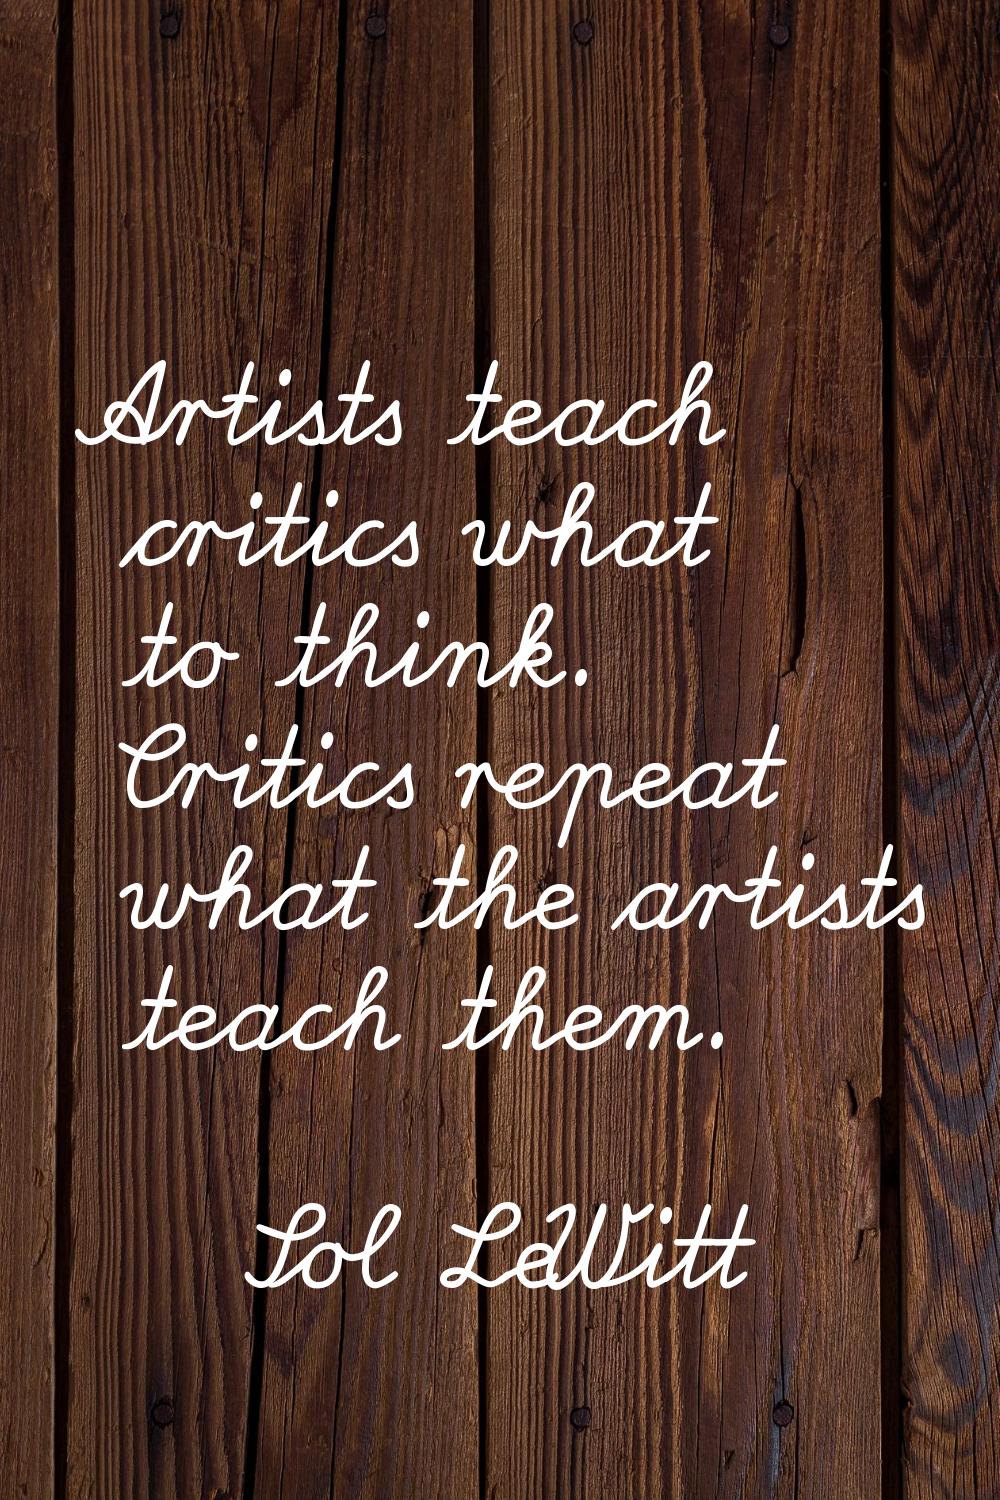 Artists teach critics what to think. Critics repeat what the artists teach them.